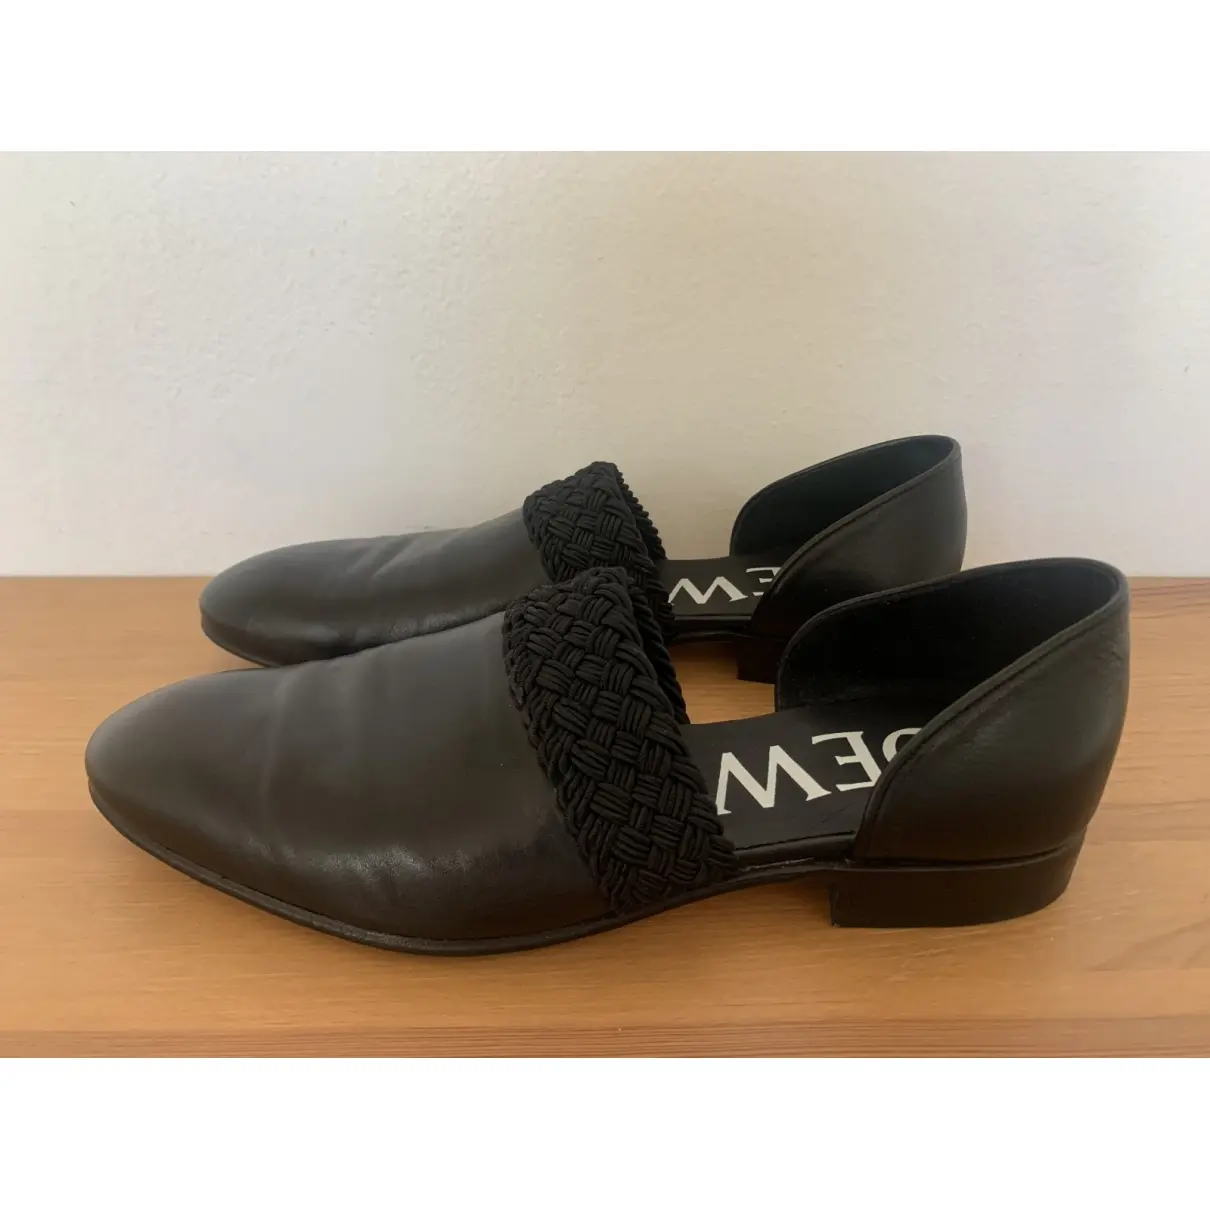 Loewe Leather flats for sale